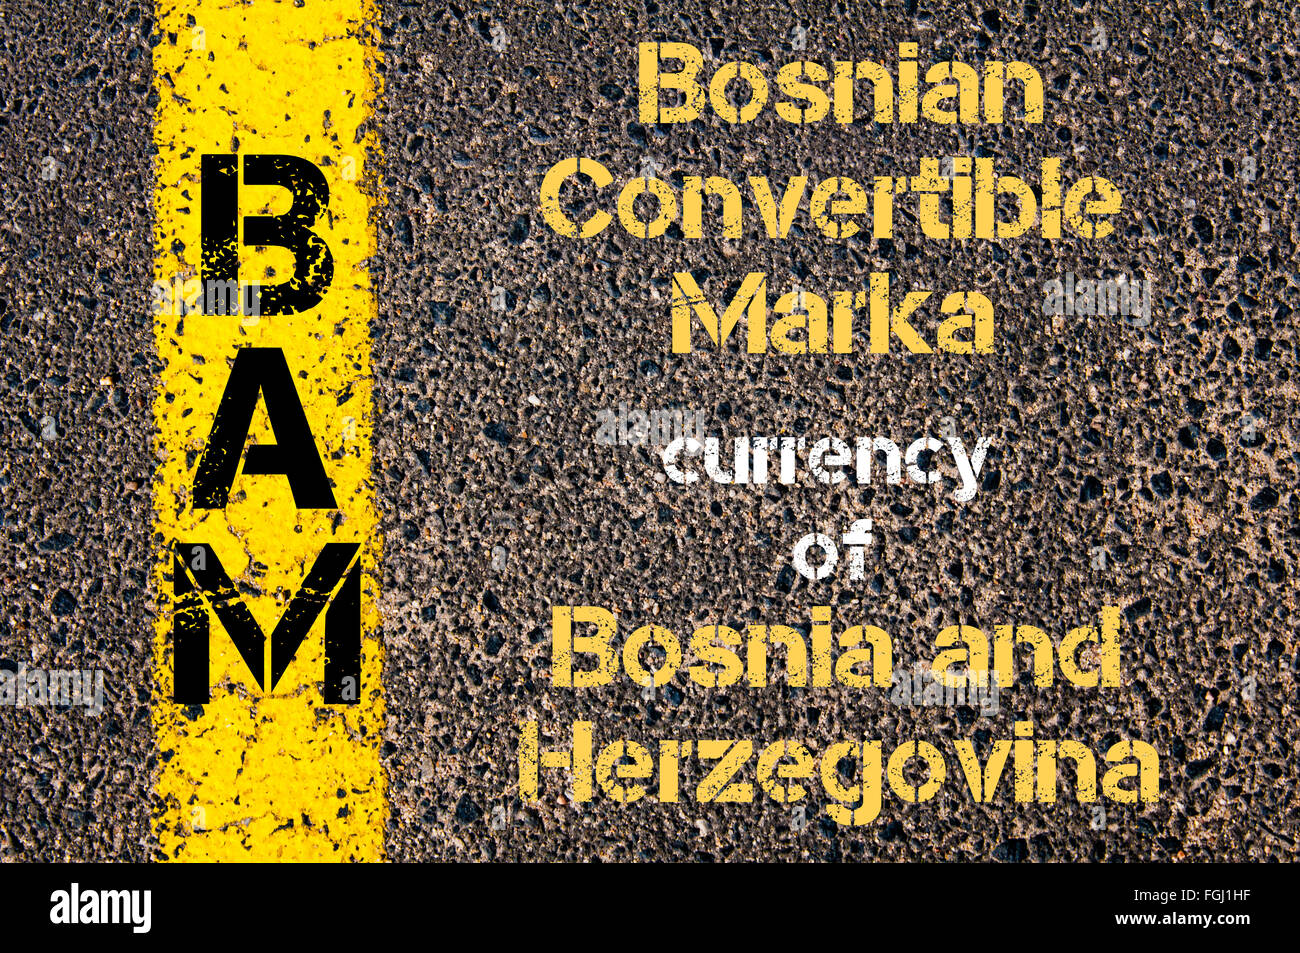 Concept image of Acronym BAM - Bosnian Convertible Marka, currency of Bosnia and Herzegovina written over road marking yellow paint line Stock Photo